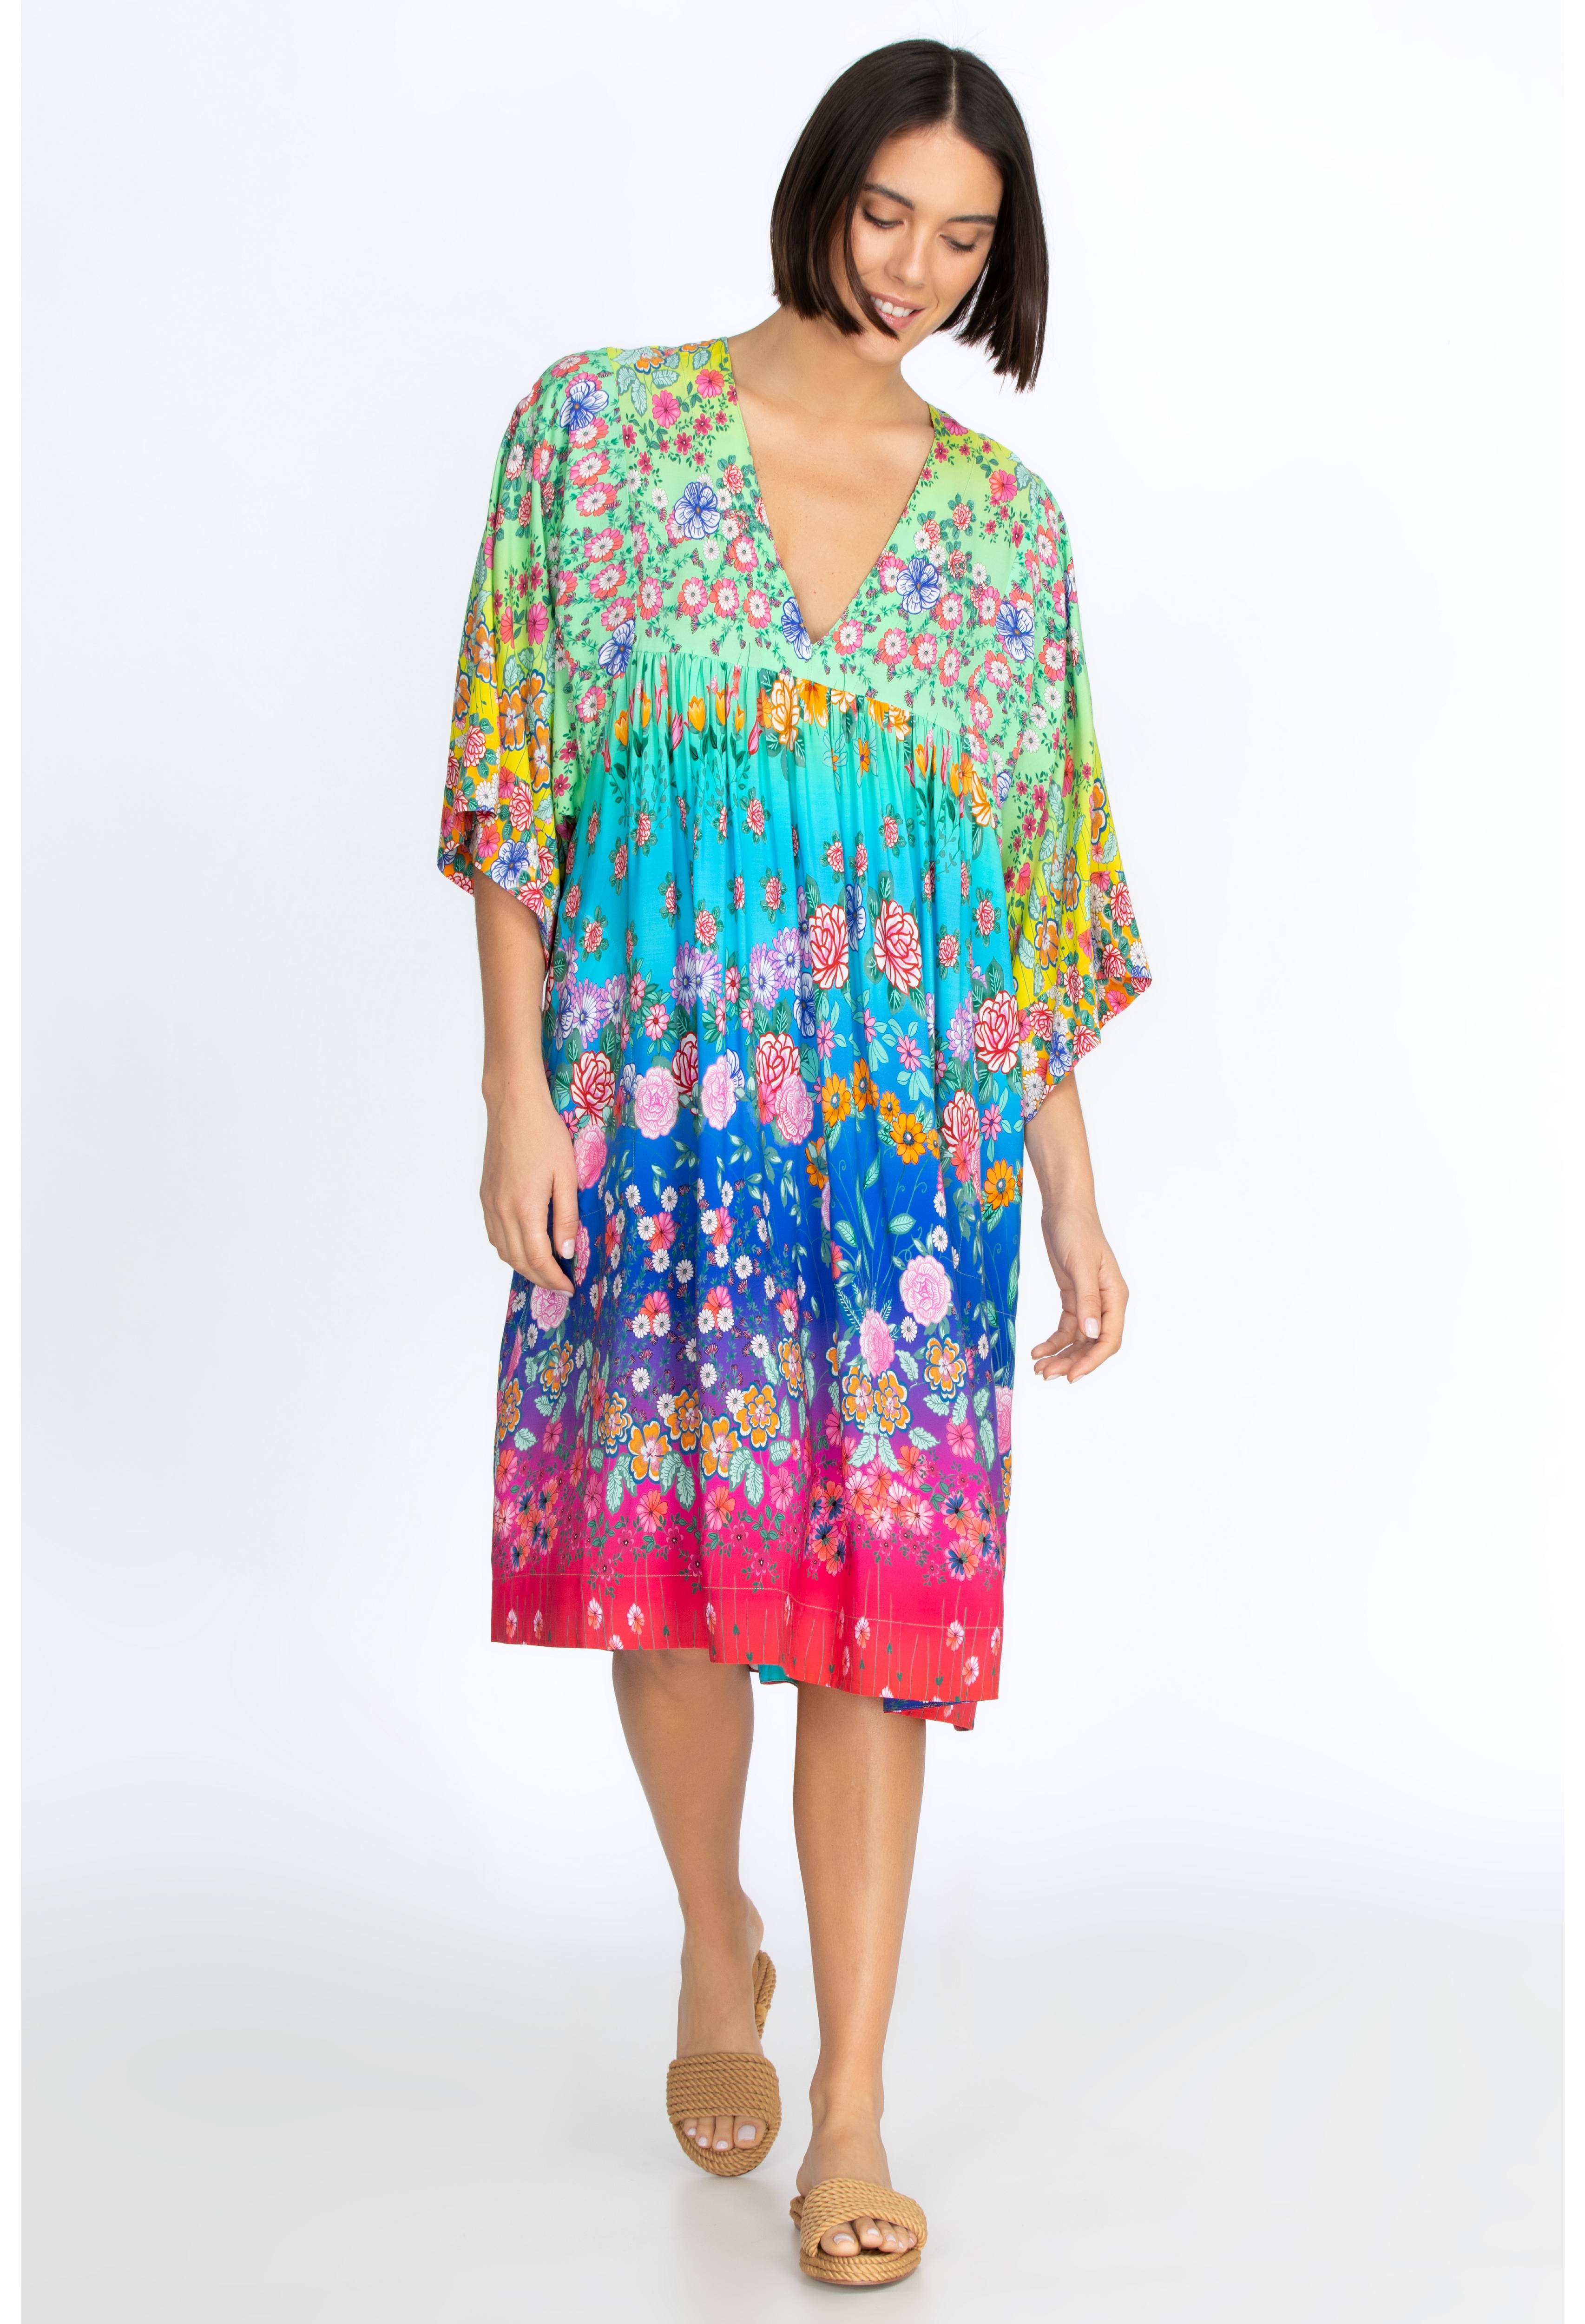 Rainbow Easy Cover-Up Dress, , large image number 2